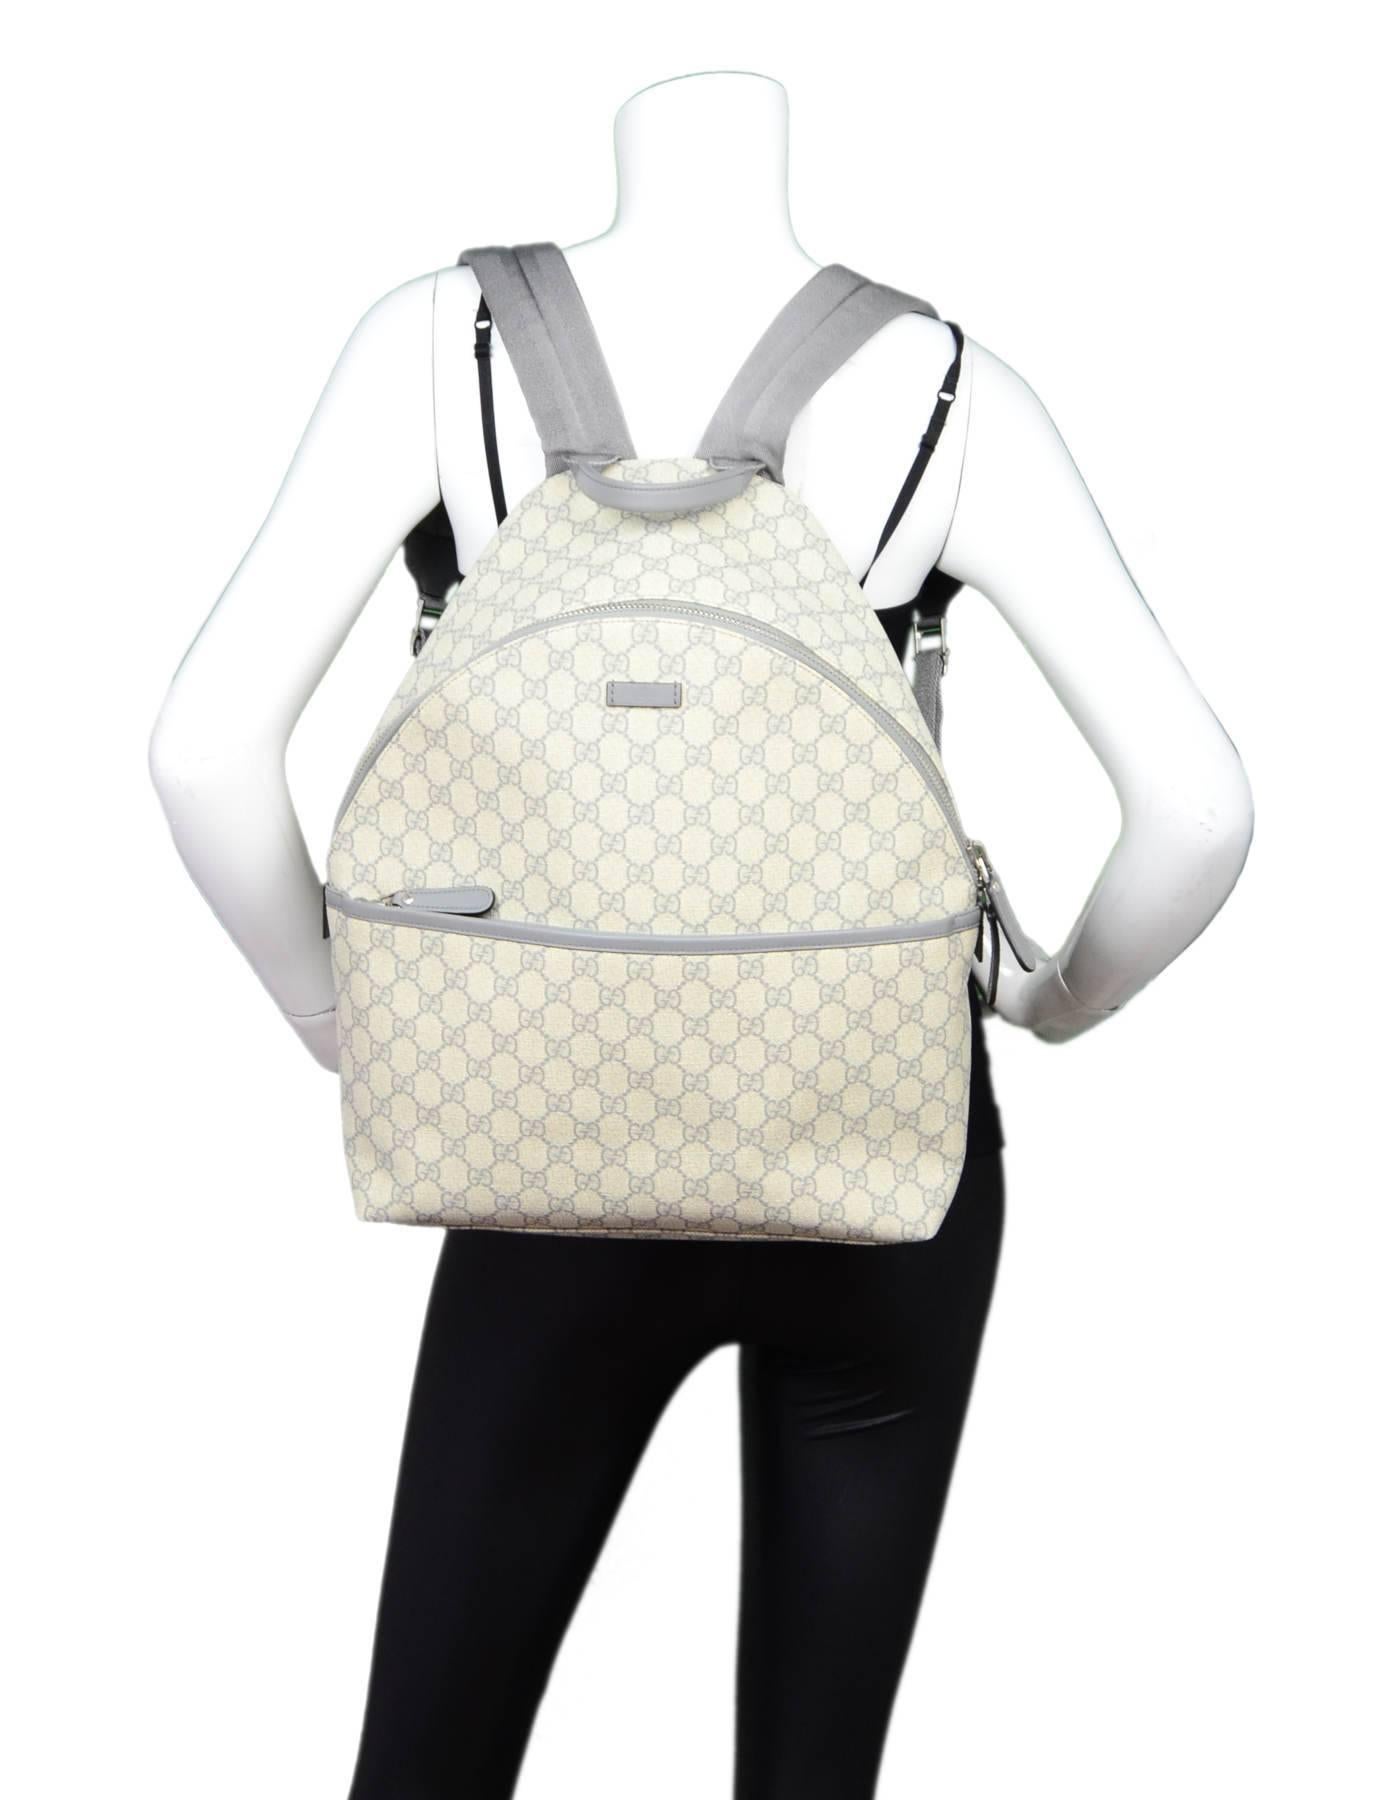 Gucci Monogram GG Supreme Backpack

Made In: Italy
Color: Cream, grey
Hardware: Silvertone
Materials: Coated canvas, leather
Lining: Beige canvas
Exterior Pockets: Front zip pocket
Interior Pockets: Two wall pockets, zip wall pocket
Serial